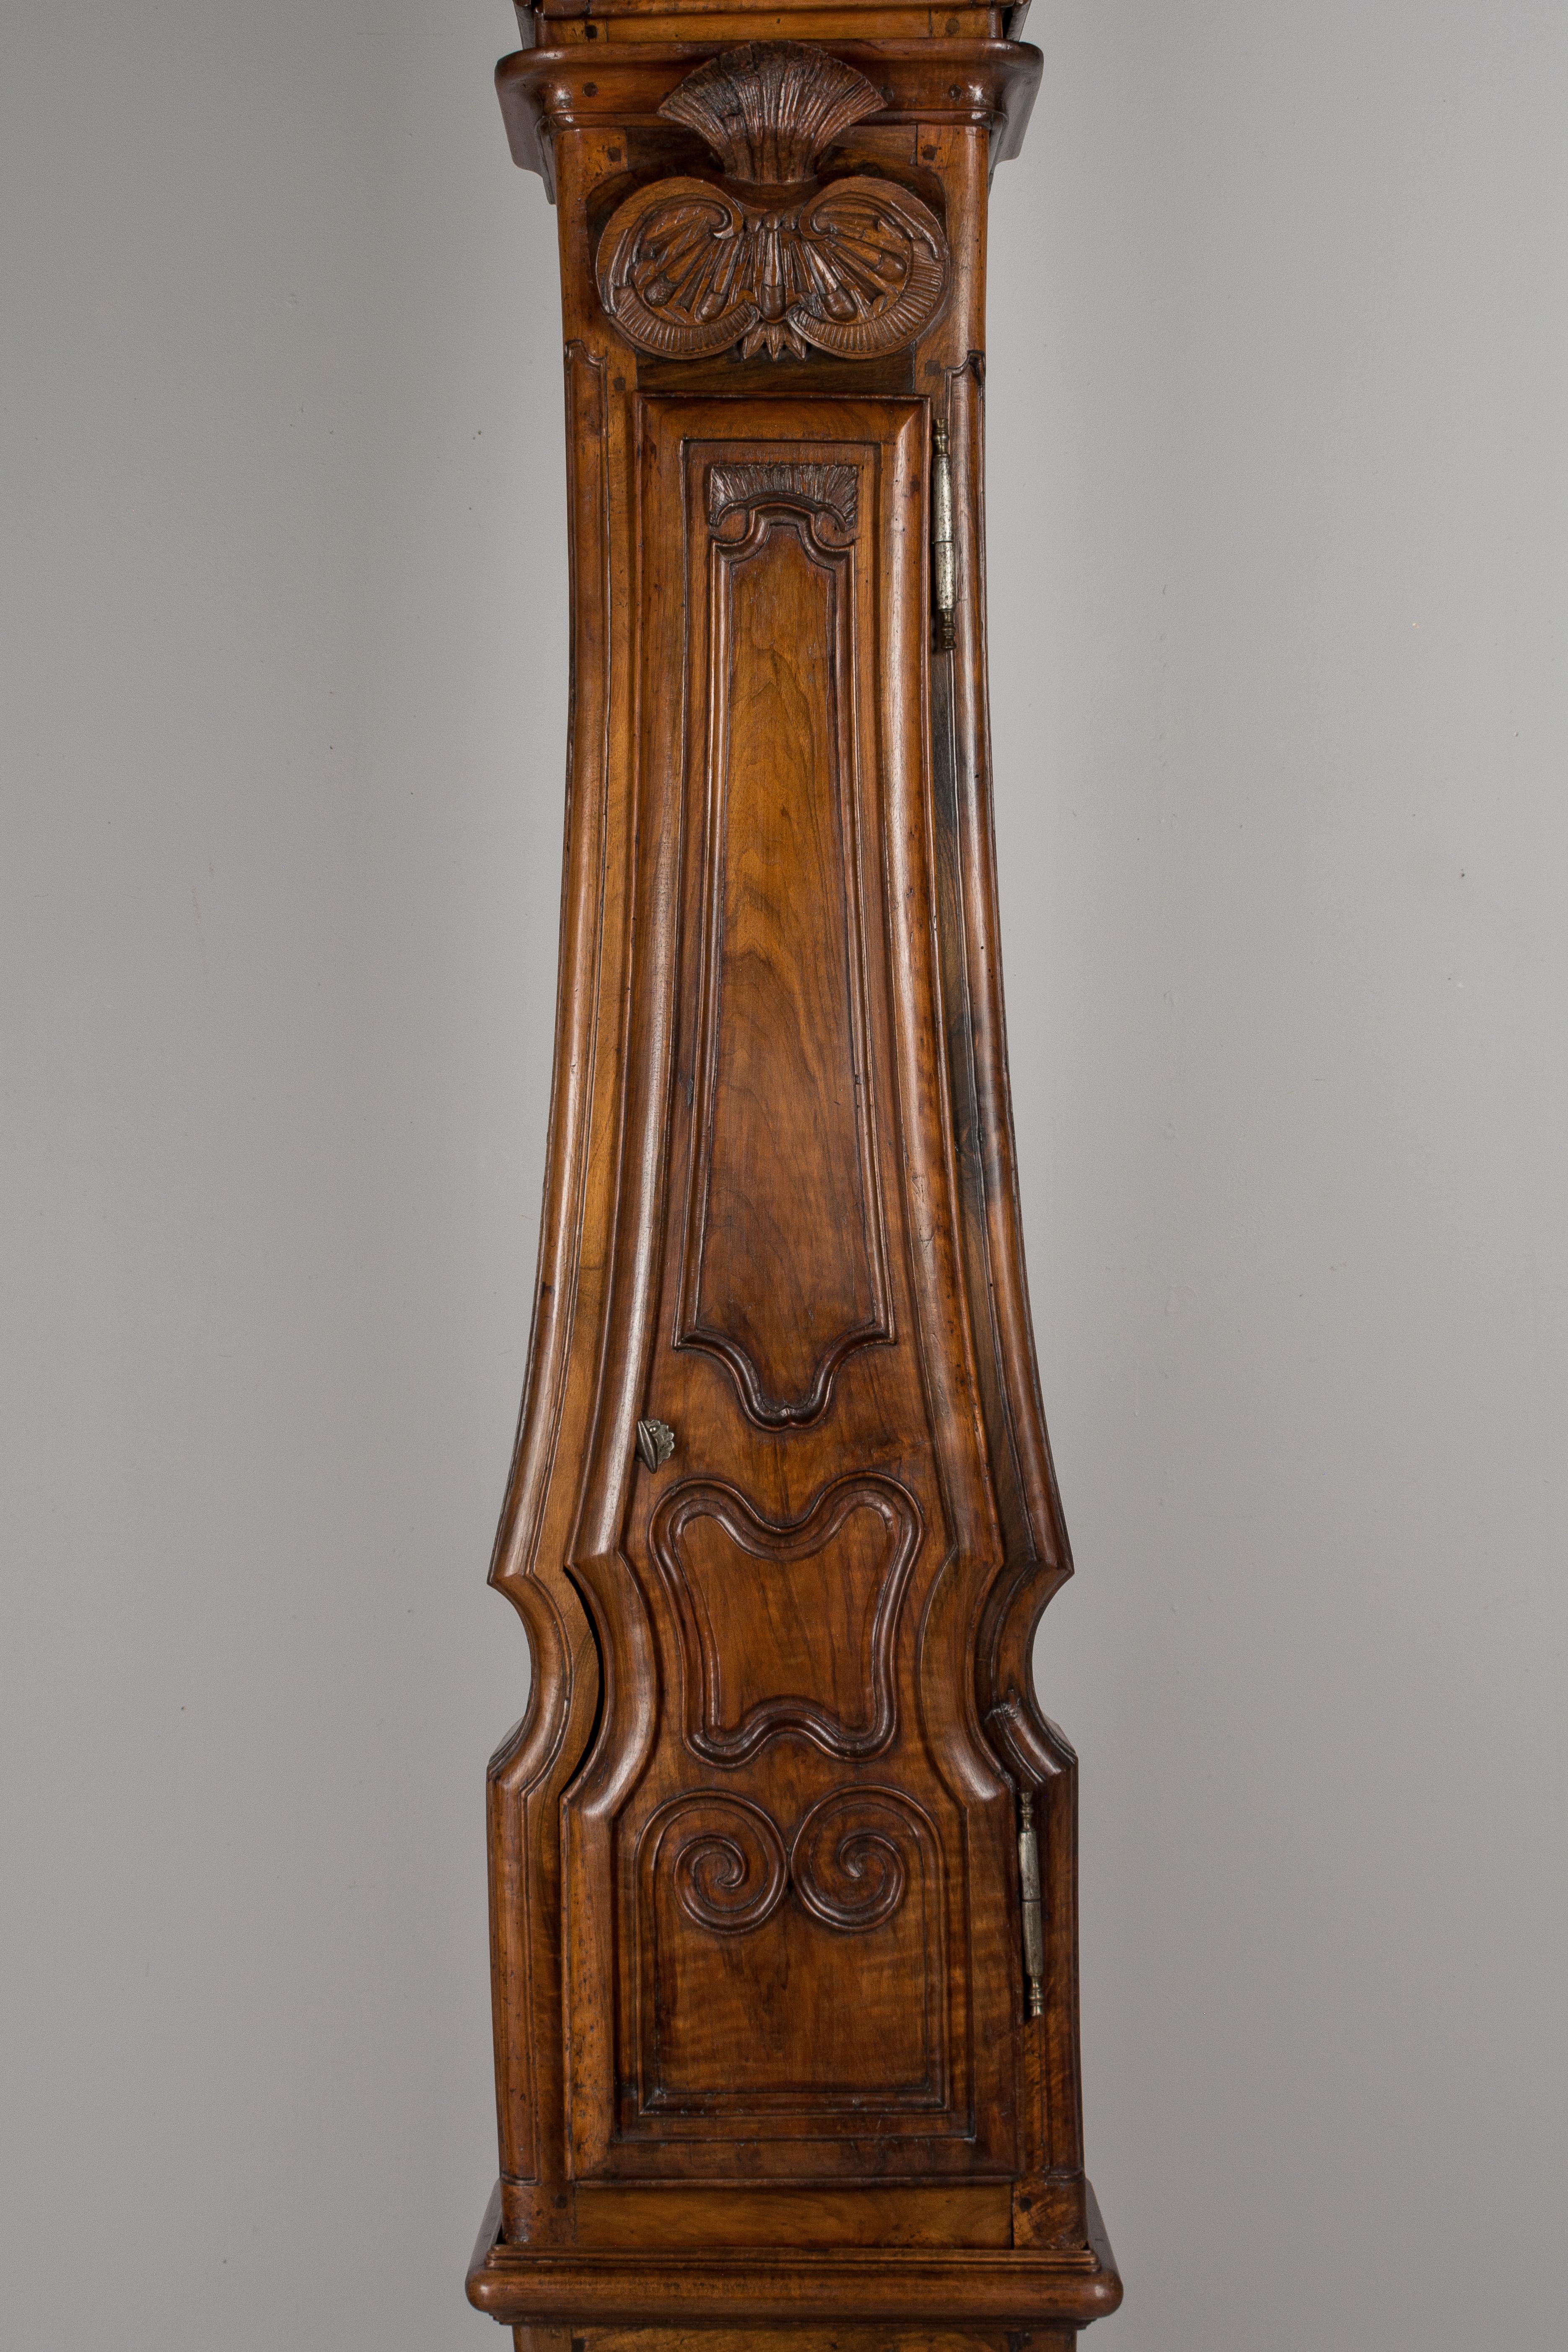 Hand-Carved 18th Century French Tall Case Clock or Horloge De Parquet